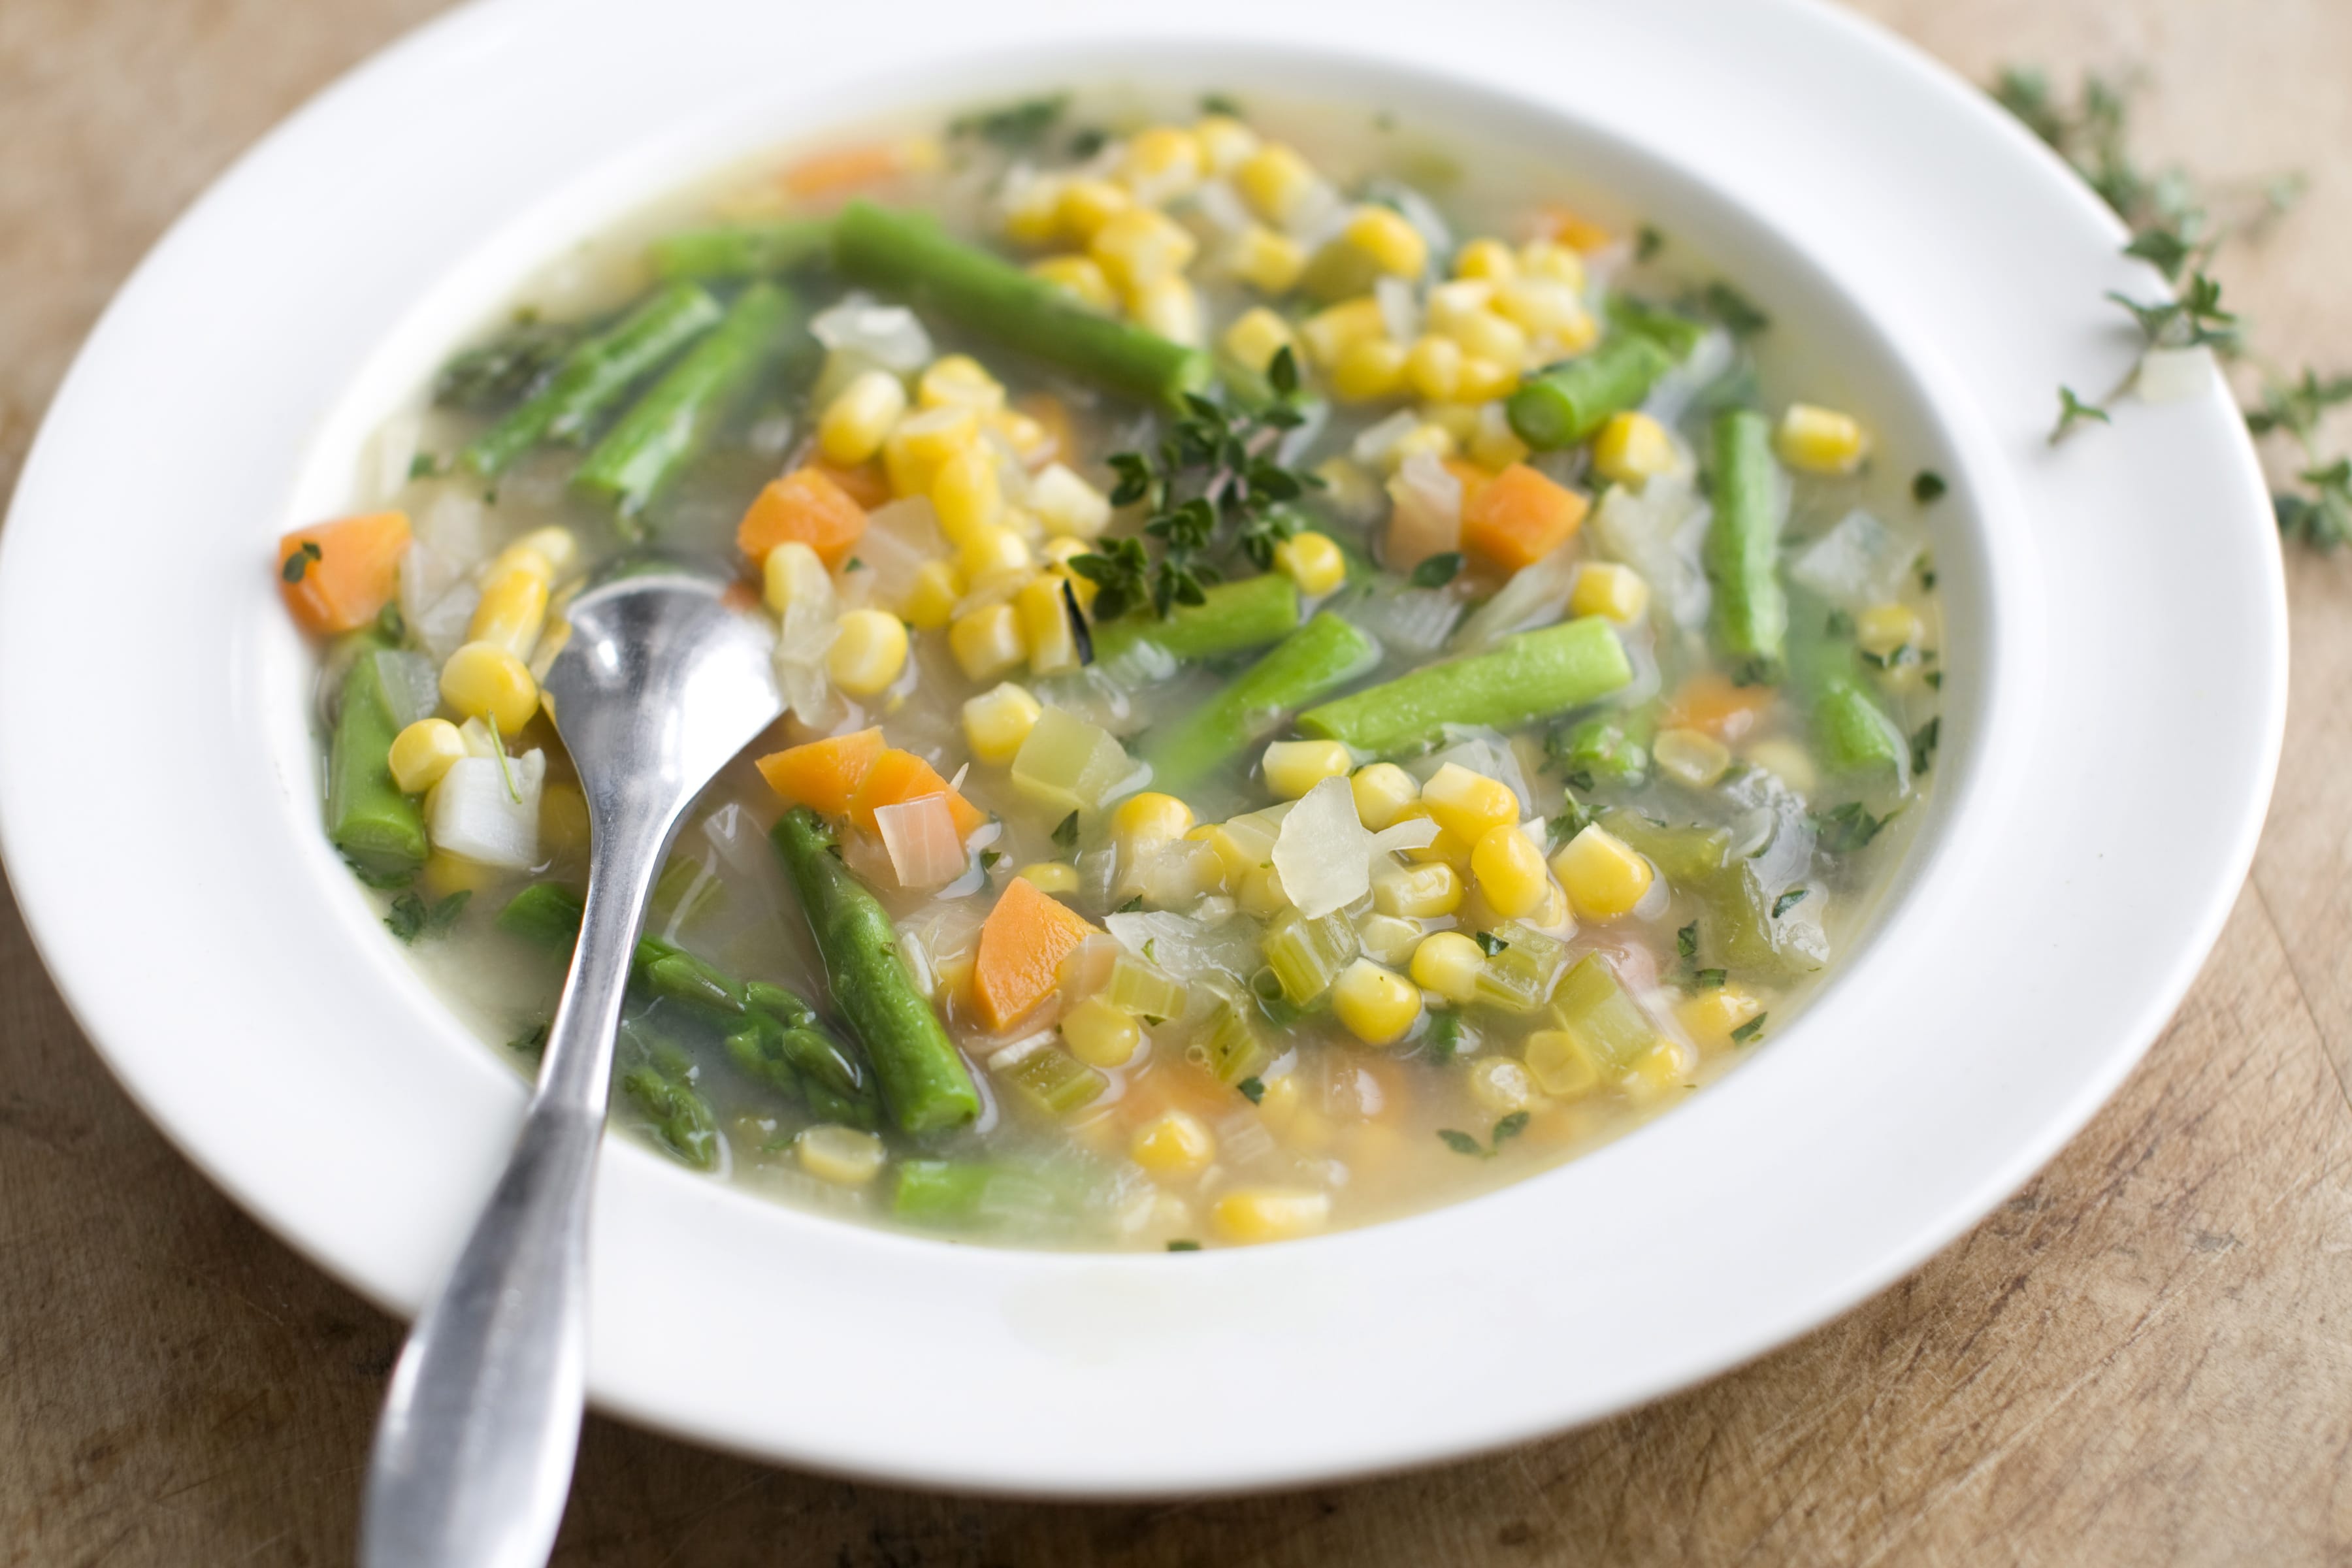 Spring corn soup comes together in about 30 minutes.